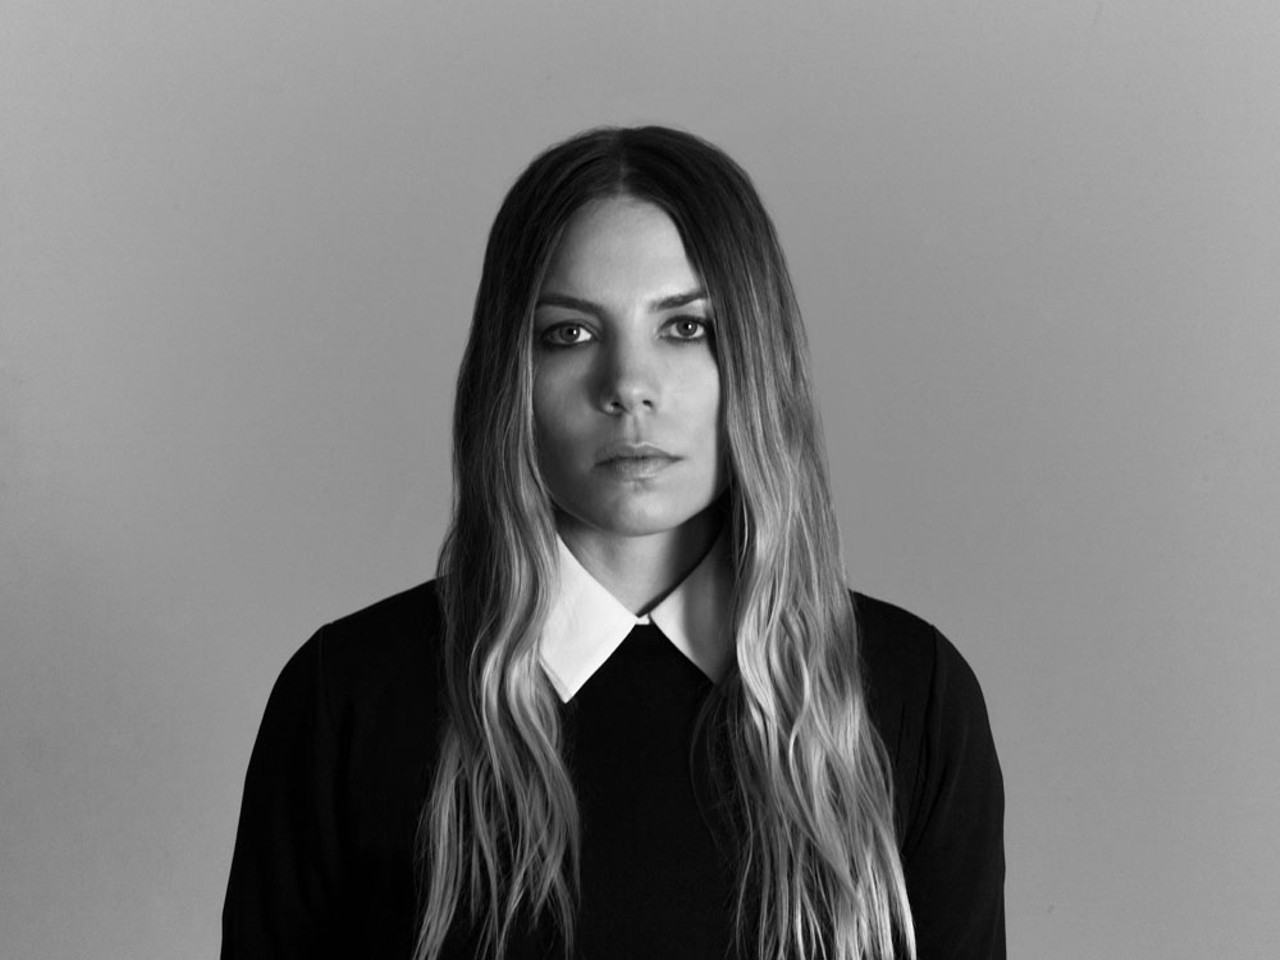 Skylar Grey- Oct 4 @ El Club 
Skylar Grey has lended her voice to Eminem, Dre, and X Ambassadors. Now, she&#146;s bringing her floaty, and sometimes jazzy, R&B to Detroit. As her first tour as a headlining act, she&#146;s definitely something to see. 
Doors open at 5 p.m., 2114 W Vernor Hwy., Detroit;  Tickets are $18 in advance and $20 in advance.
Photo via Facebook